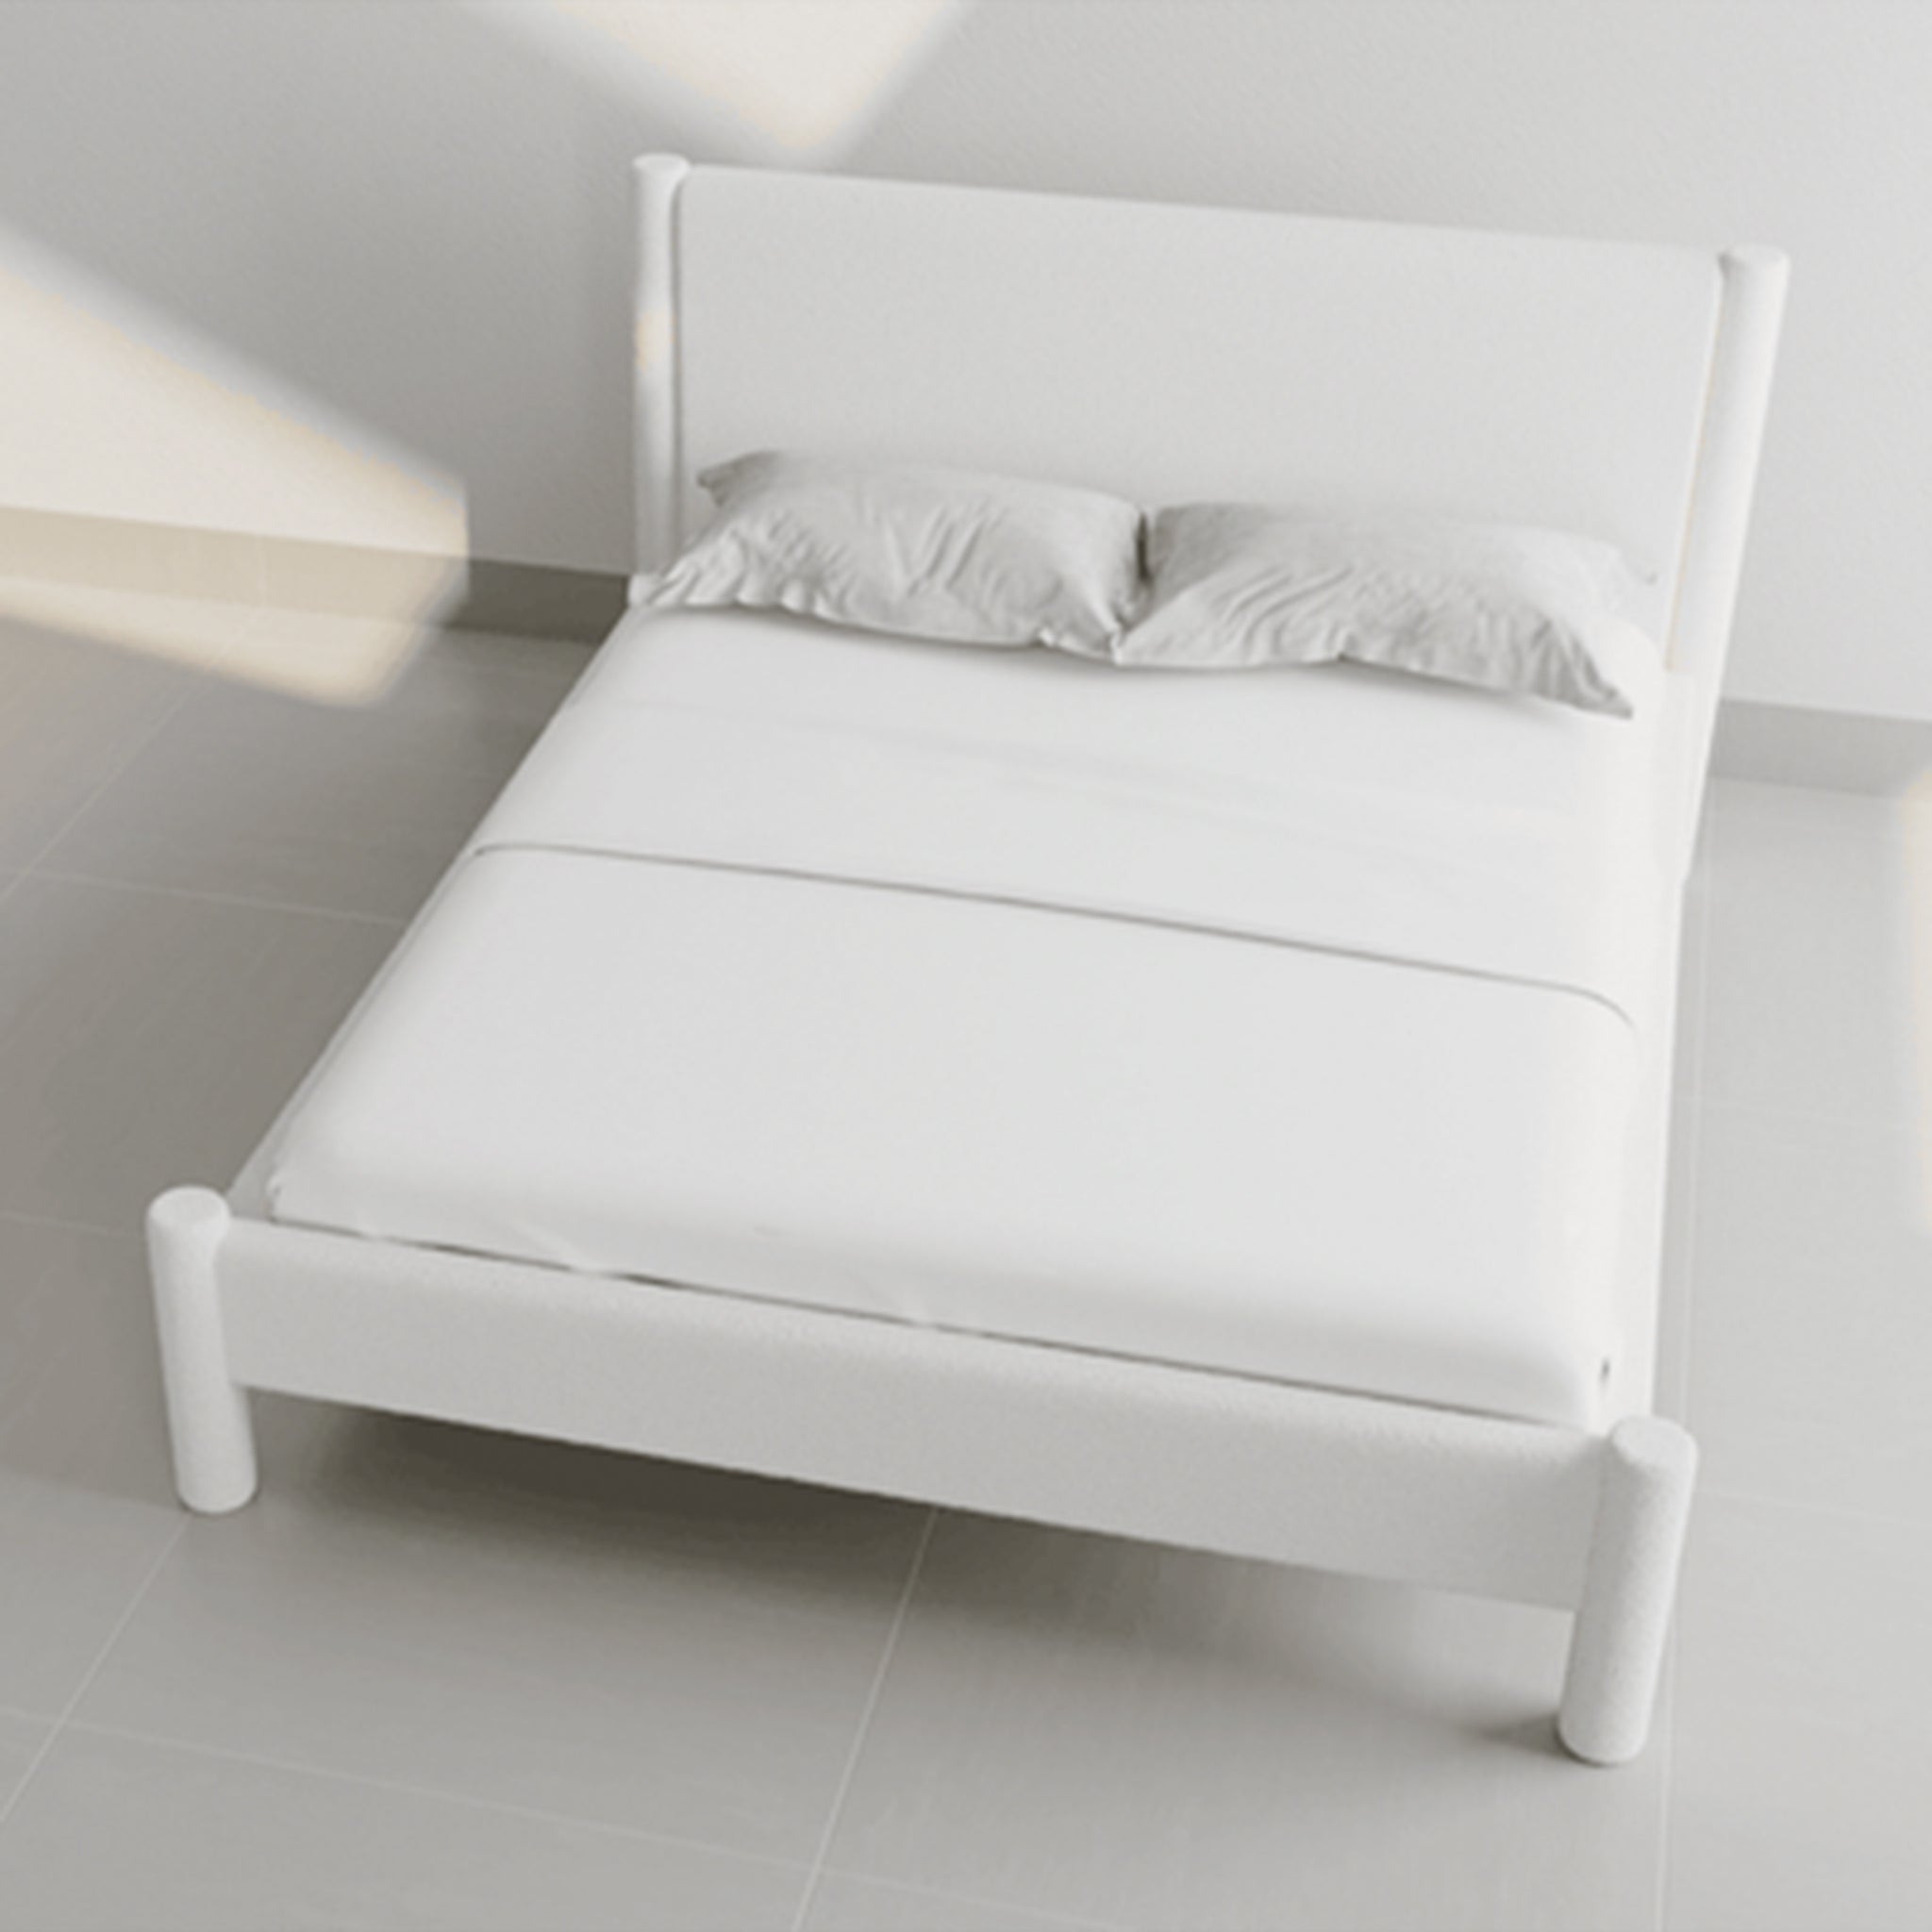 Fully upholstered Carrie Bed with solid beech wood foundation for durability.